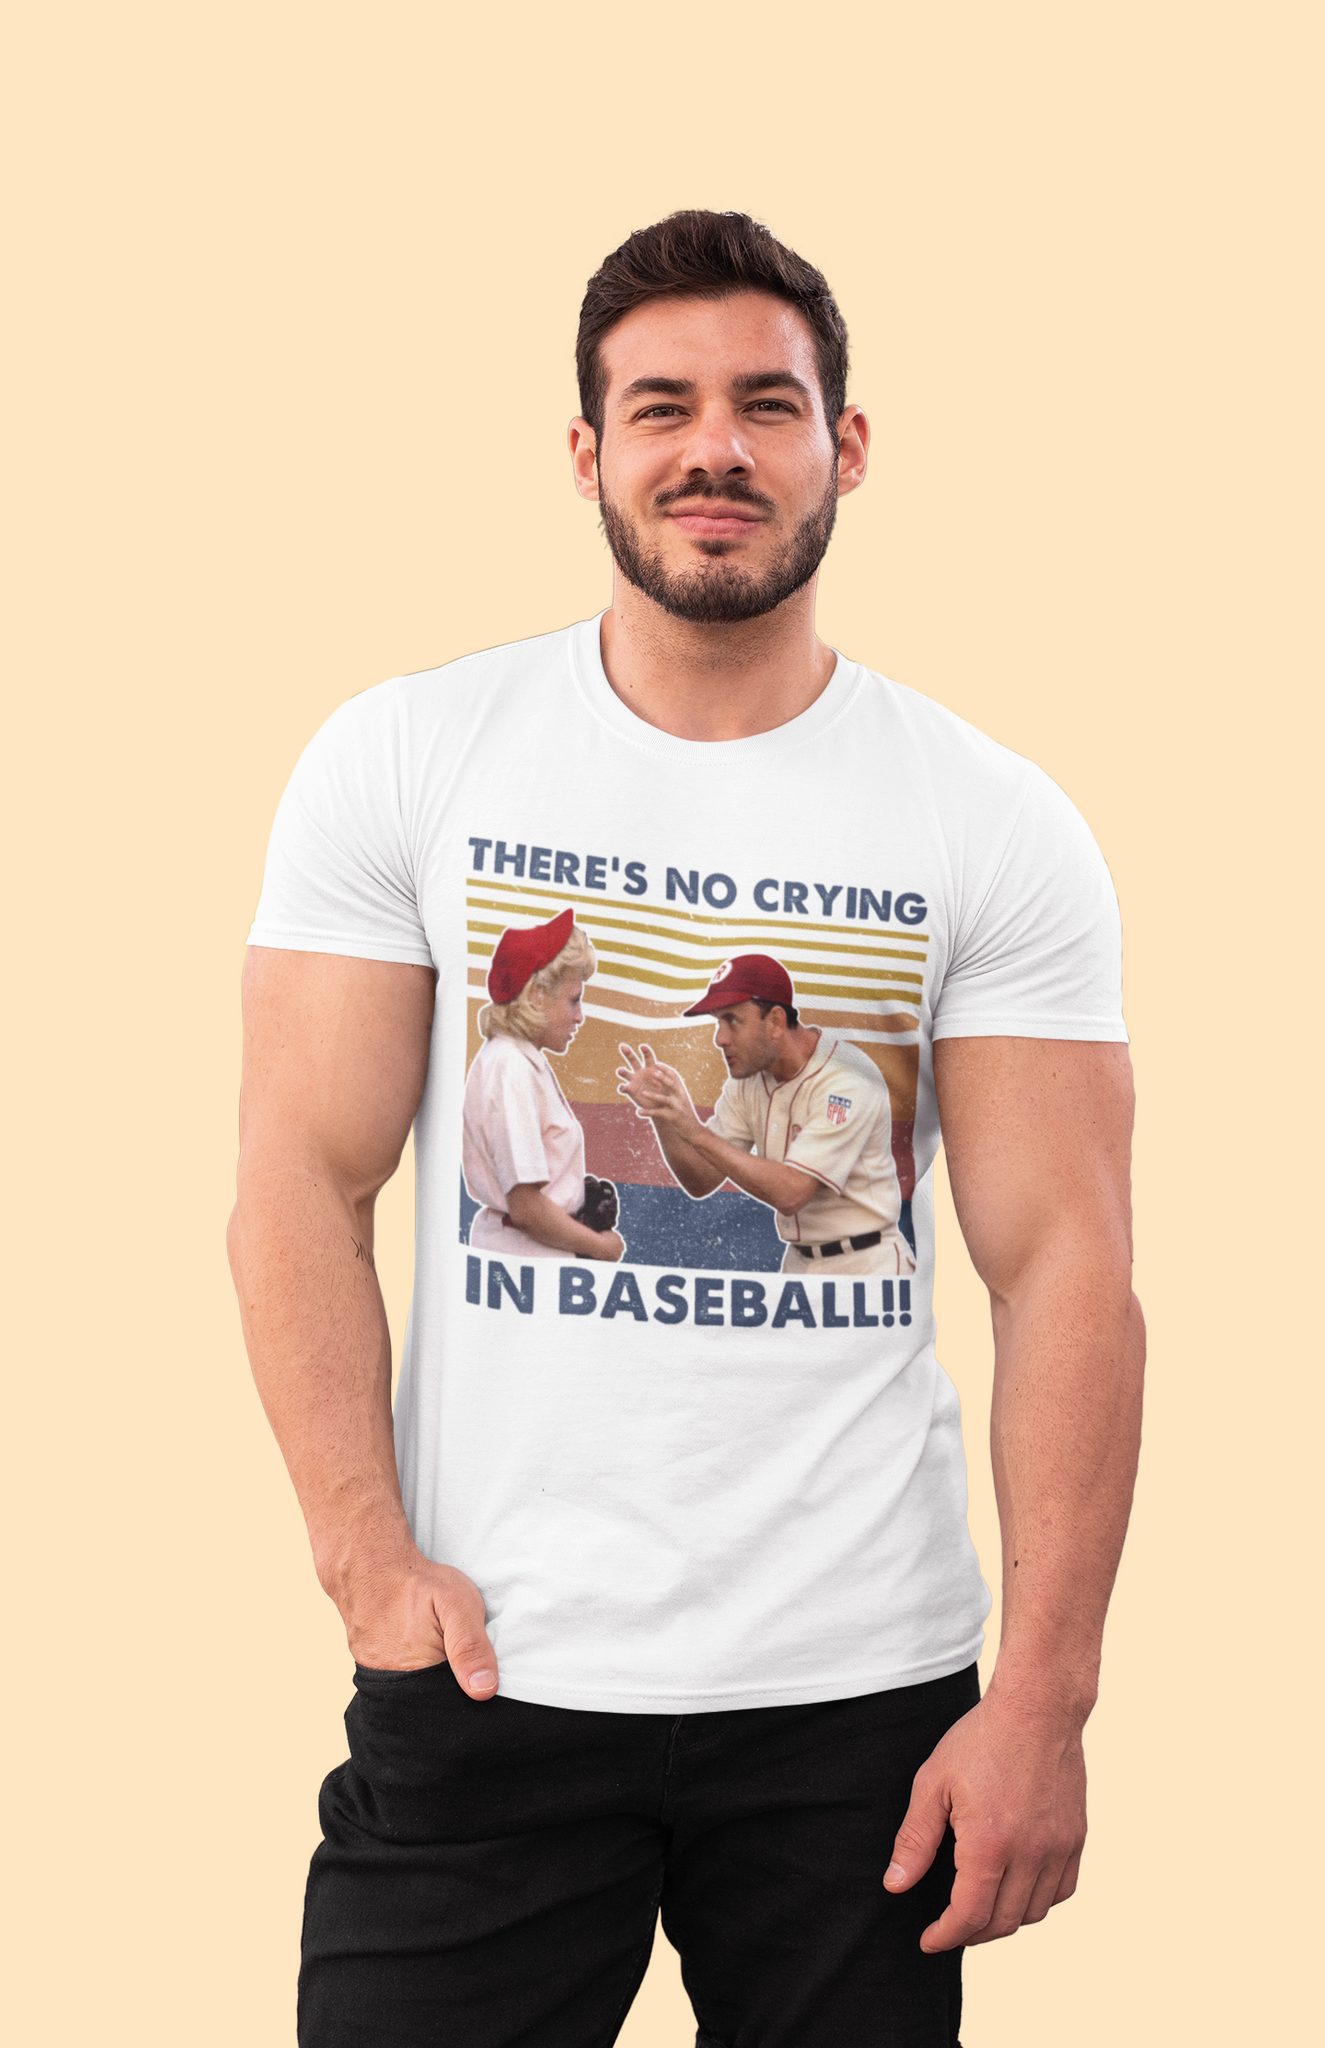 A League Of Their Own T Shirt, Jimmy Dugan Tshirt, Theres No Crying In Baseball Classic Tshirt